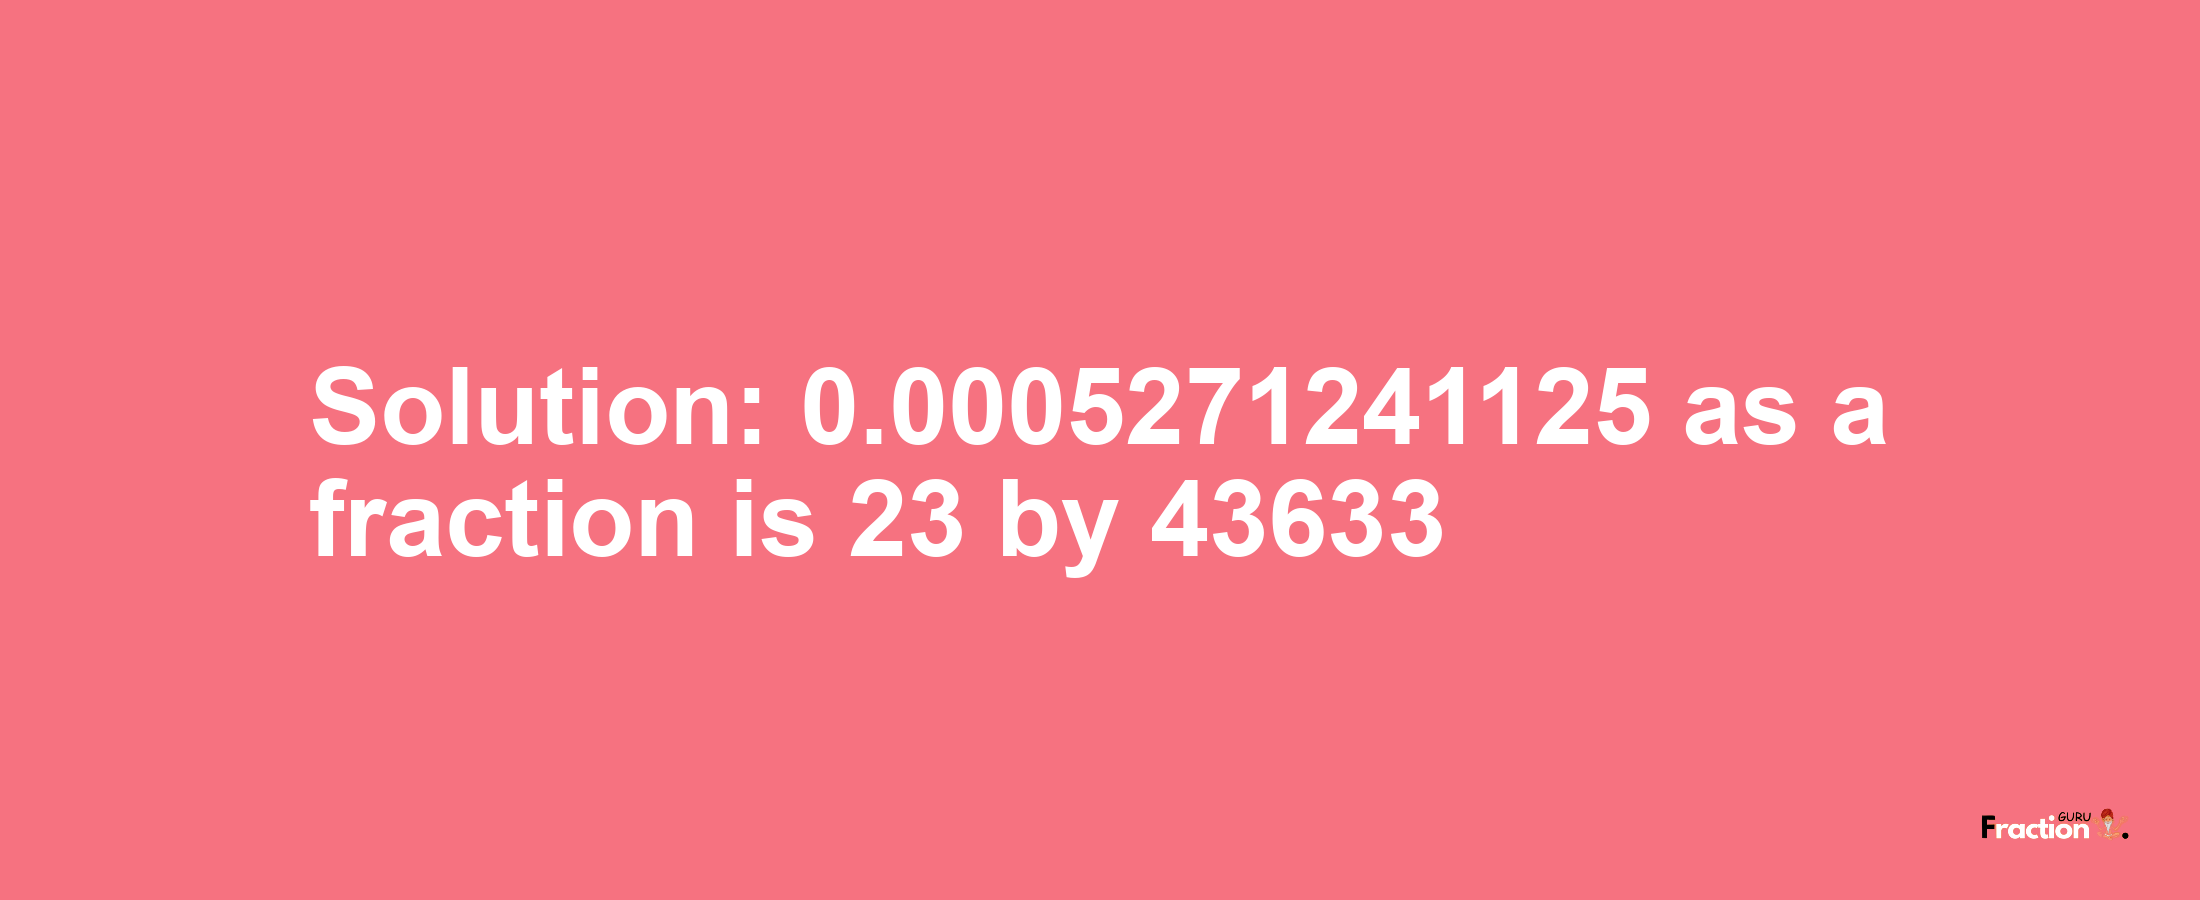 Solution:0.0005271241125 as a fraction is 23/43633